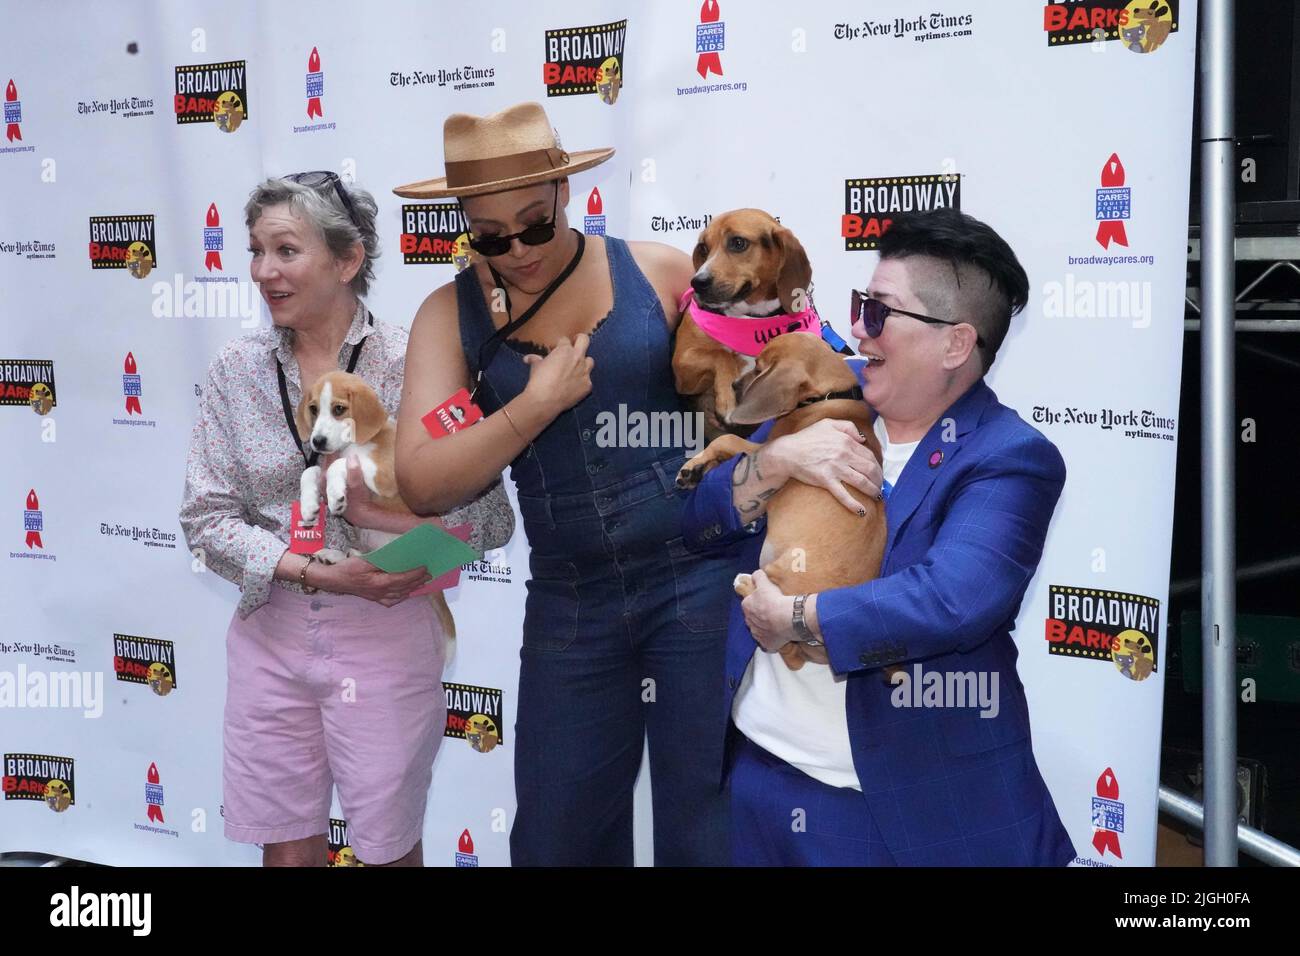 Julie White, Lilly Cooper, Lea Delaria , cast members from POTUS introduce Pups for adoption at the annual Bradway Barks event in Shubert Alley hosted by Bernadette Peters in New York. (Photo by Catherine Nance / SOPA Images/Sipa USA) Stock Photo